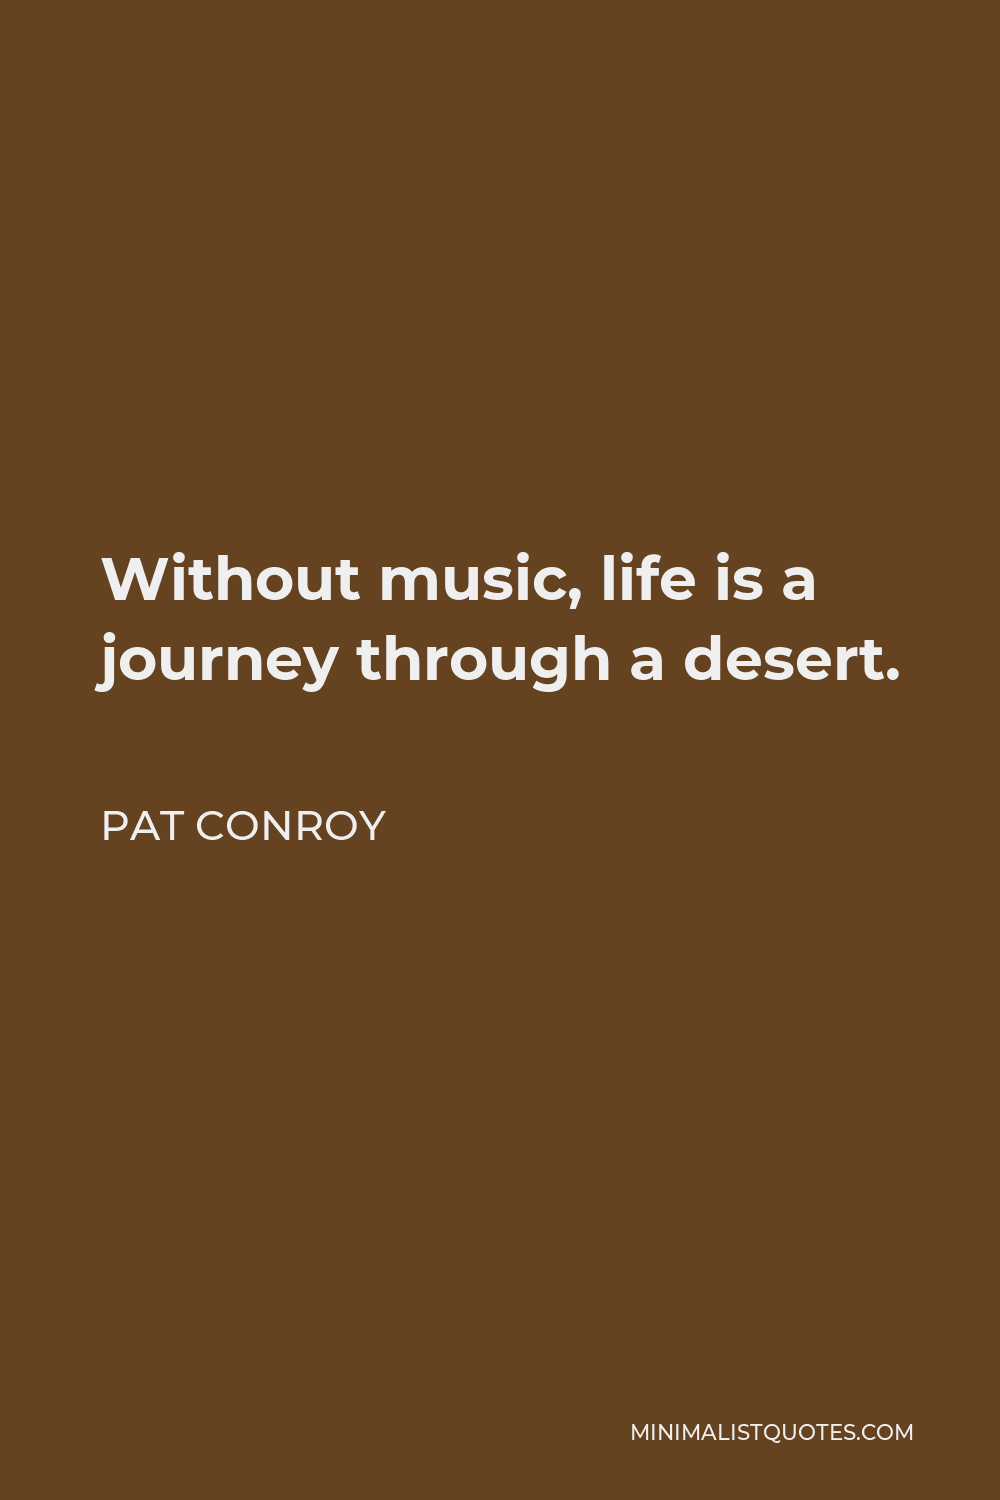 Pat Conroy Quote - Without music, life is a journey through a desert.